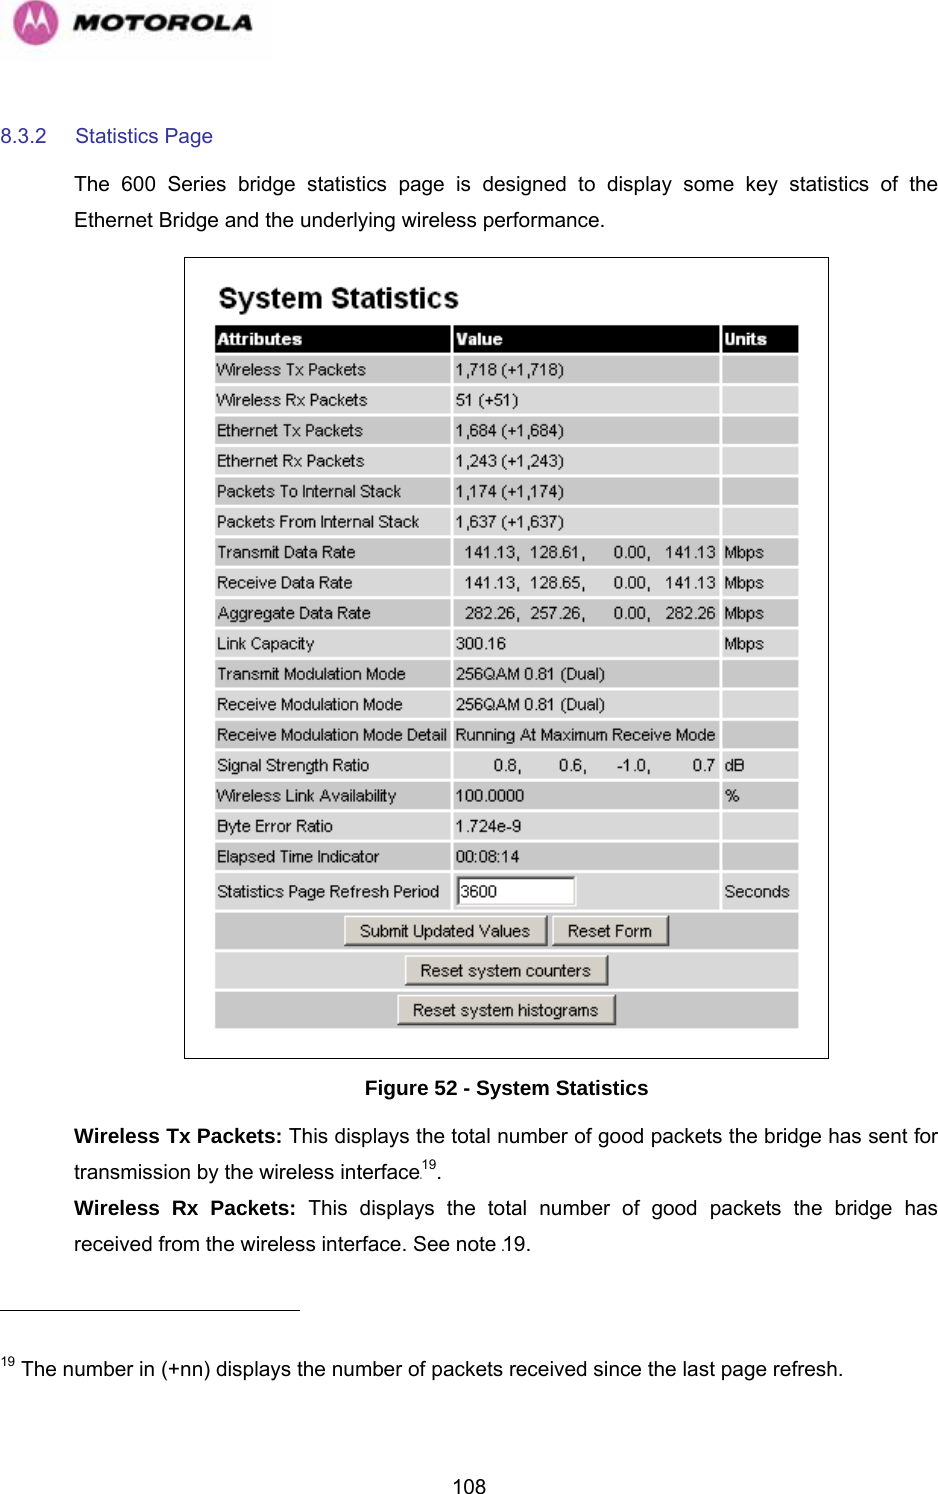   1088.3.2  Statistics Page  The 600 Series bridge statistics page is designed to display some key statistics of the Ethernet Bridge and the underlying wireless performance.   Figure 52 - System Statistics Wireless Tx Packets: This displays the total number of good packets the bridge has sent for transmission by the wireless interface18F19. Wireless Rx Packets: This displays the total number of good packets the bridge has received from the wireless interface. See note 1080H19.                                                       19 The number in (+nn) displays the number of packets received since the last page refresh. 